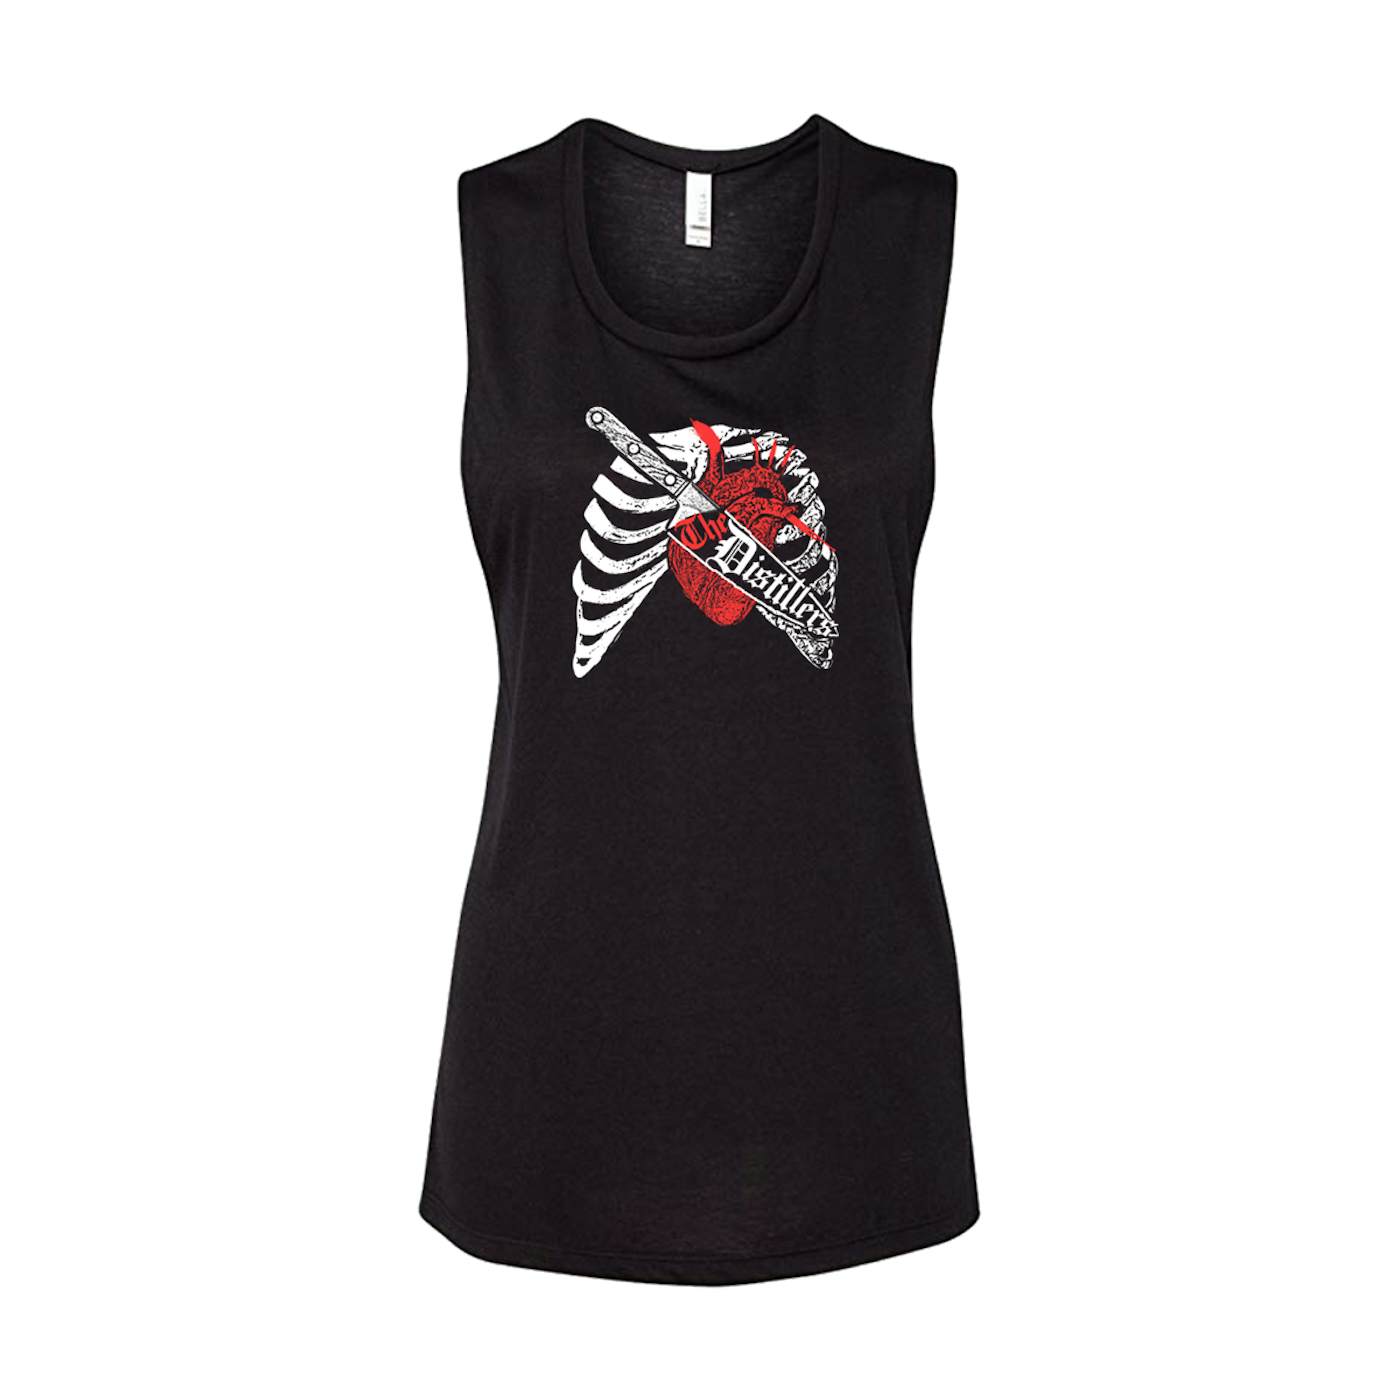 The Distillers Heart Muscle Tank